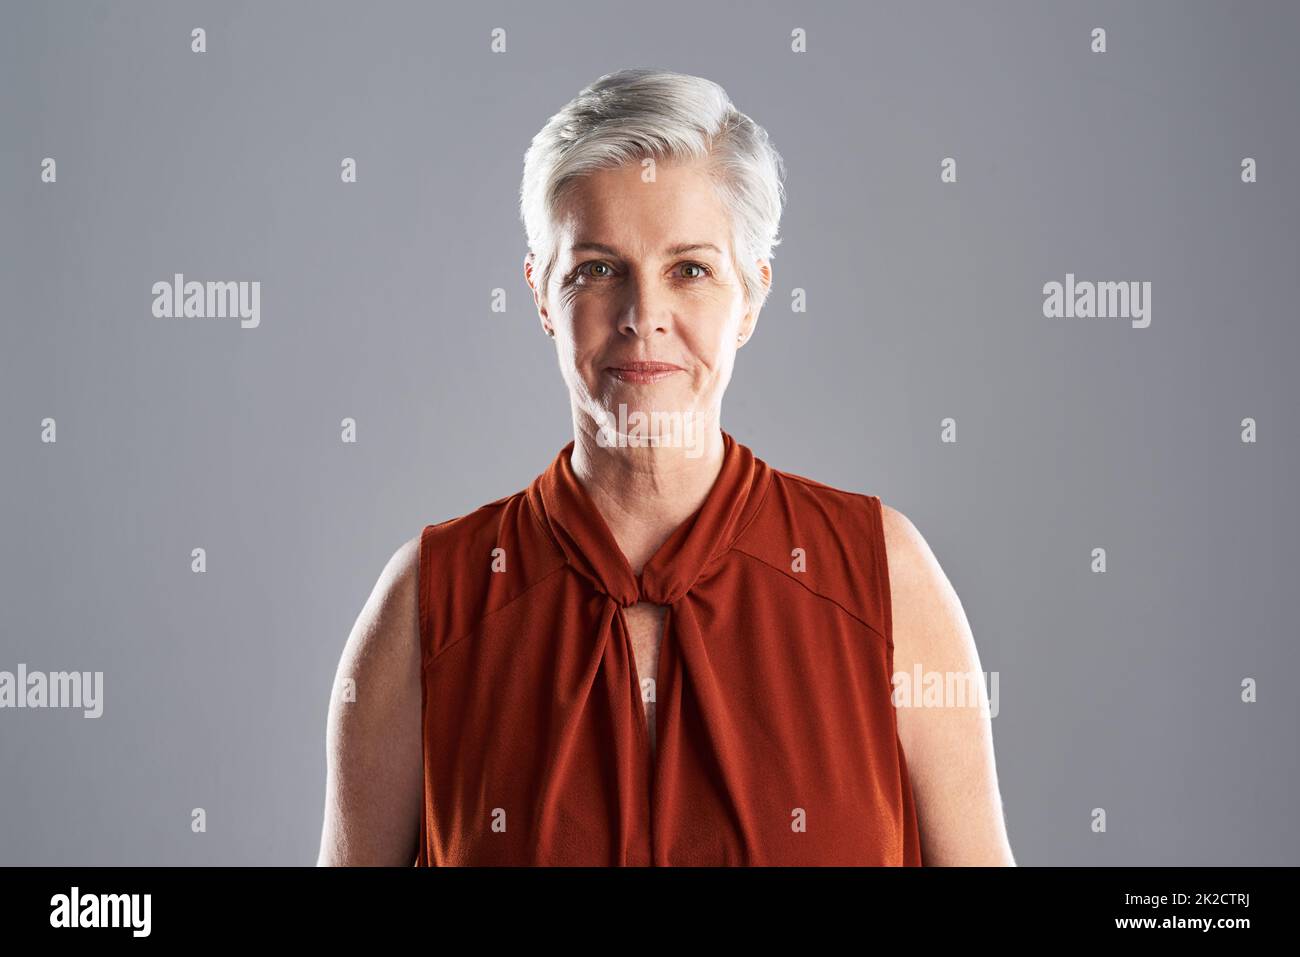 Her beauty is timeless. Portrait of an attractive mature woman posing against a grey background. Stock Photo